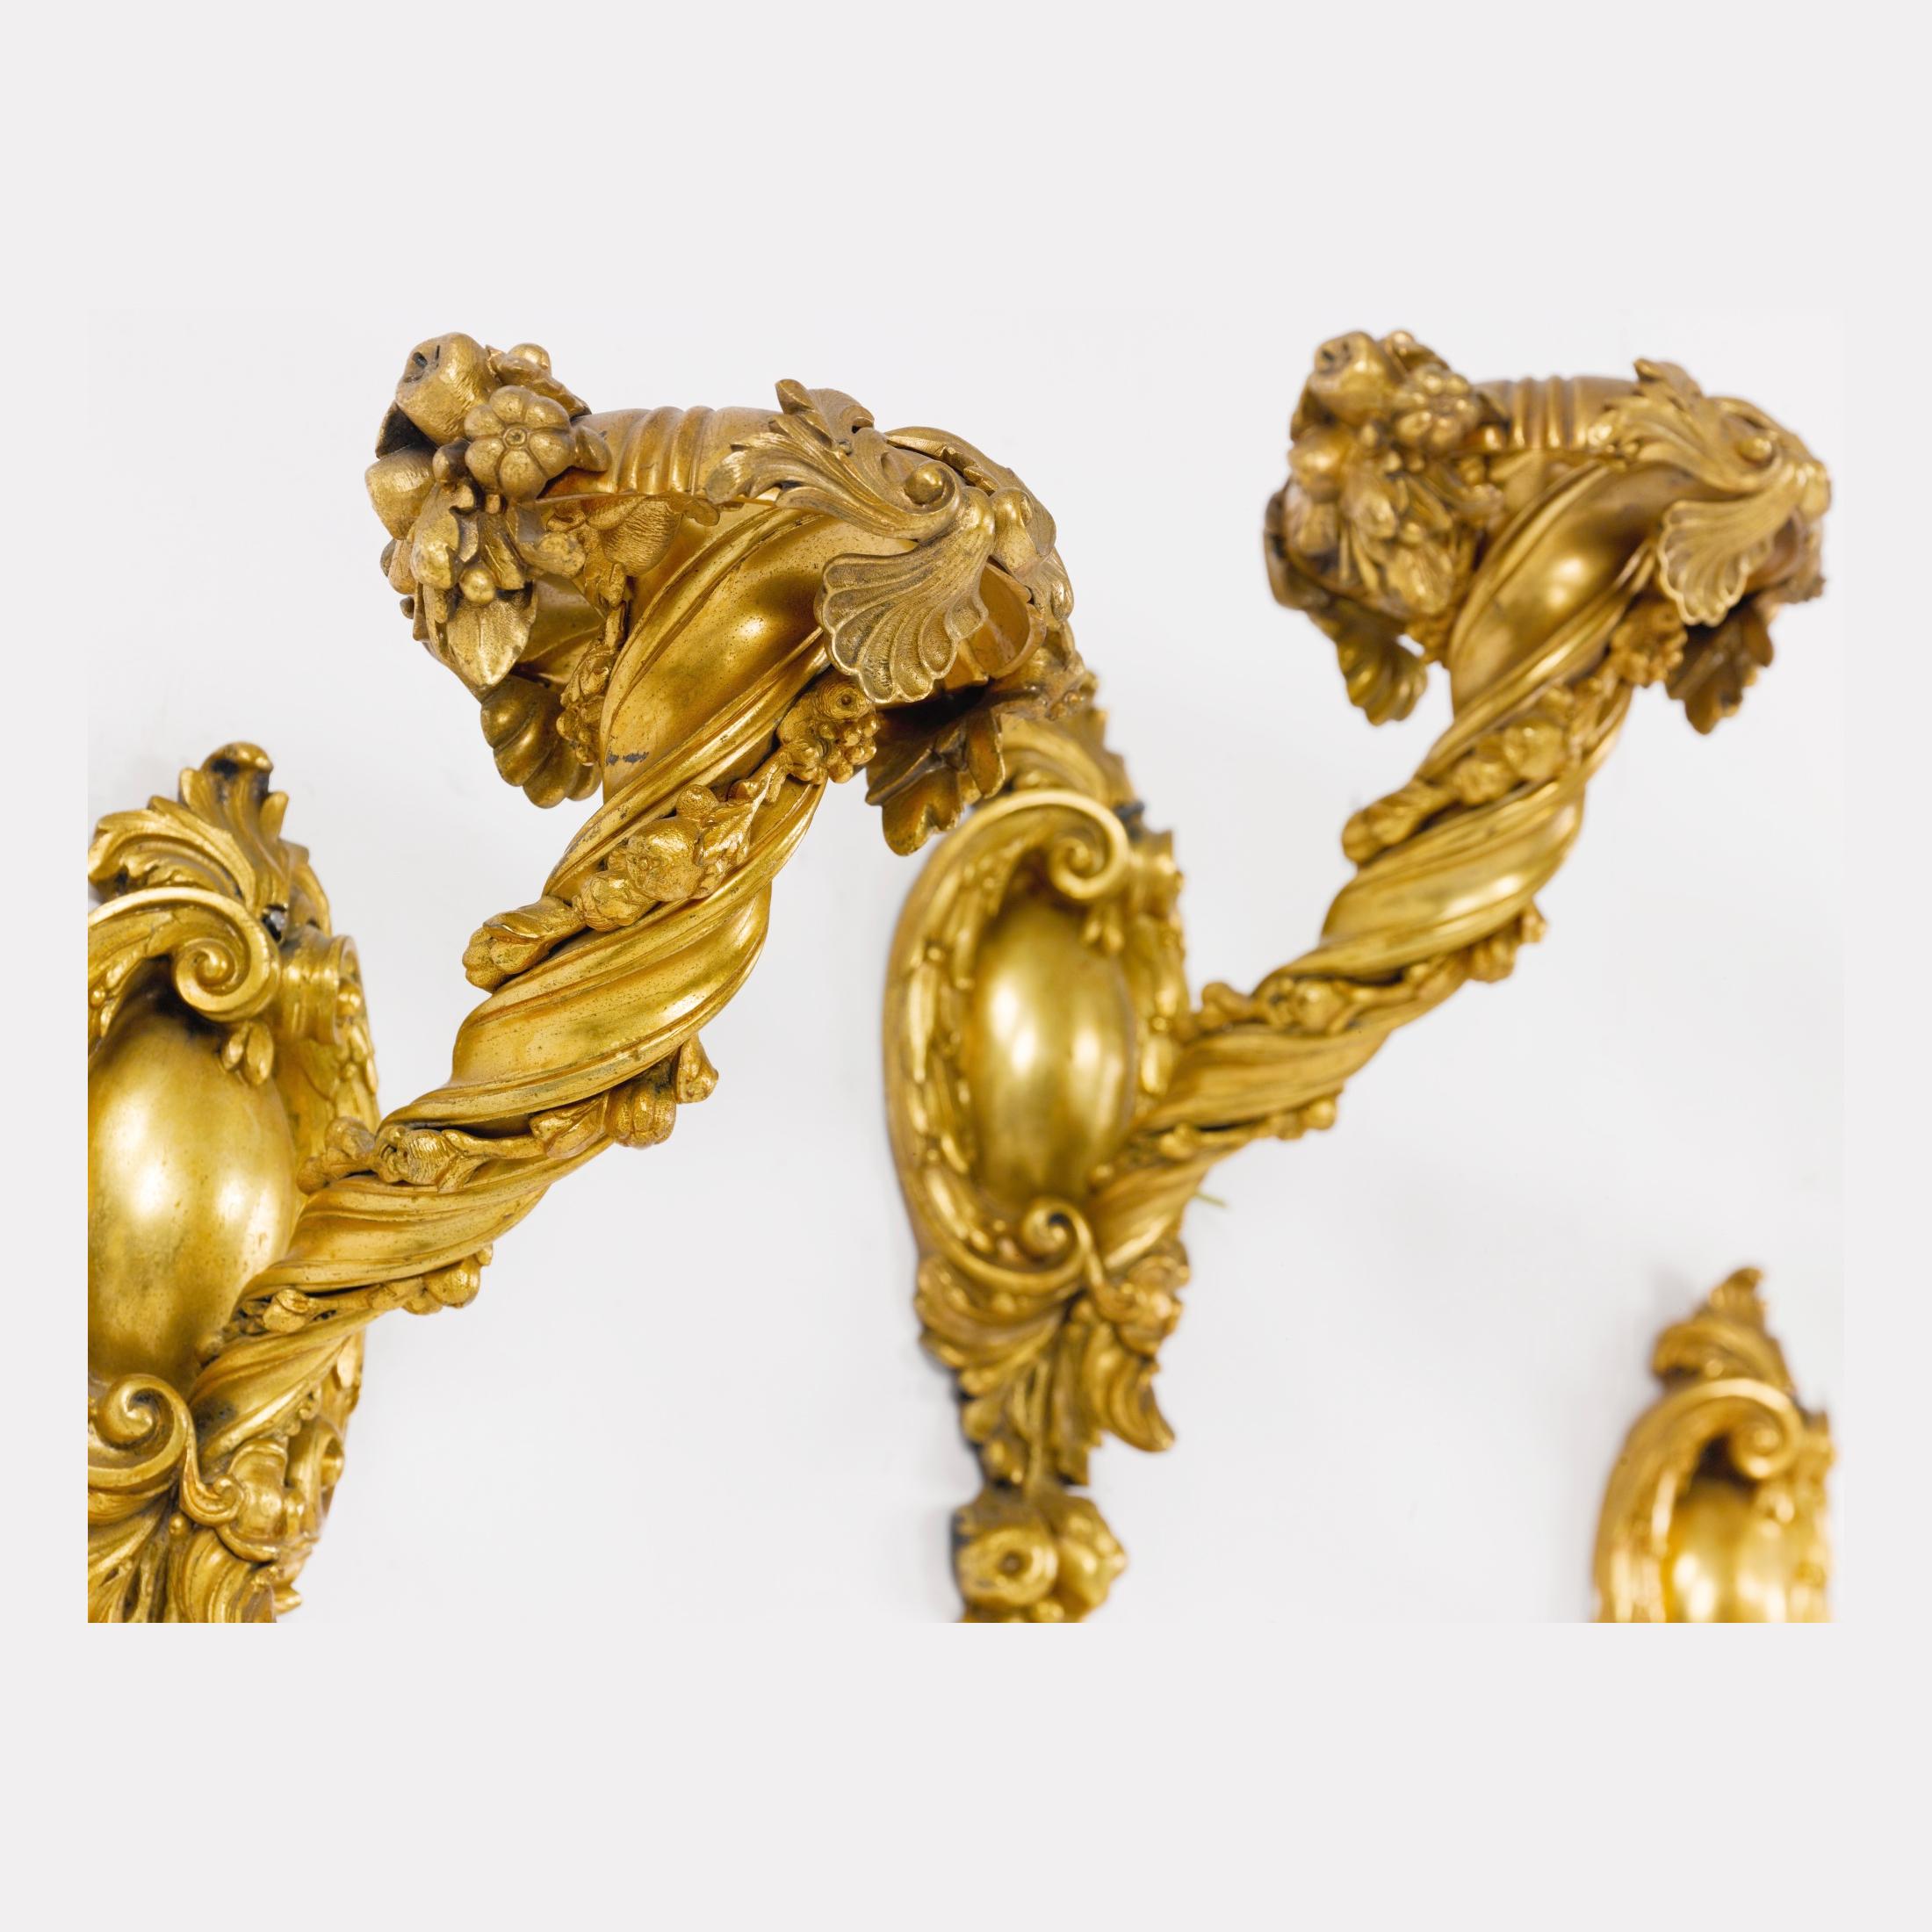 A rare set of four gilt bronze single branch wall sconces attributed to Caldwell
Maker: Attrib. Edward F. Caldwell Co. (1851-1914)
Origin: French
Date: First half of the 20th century
Size: 13 in. x 7 1/4 in. x 10 in.